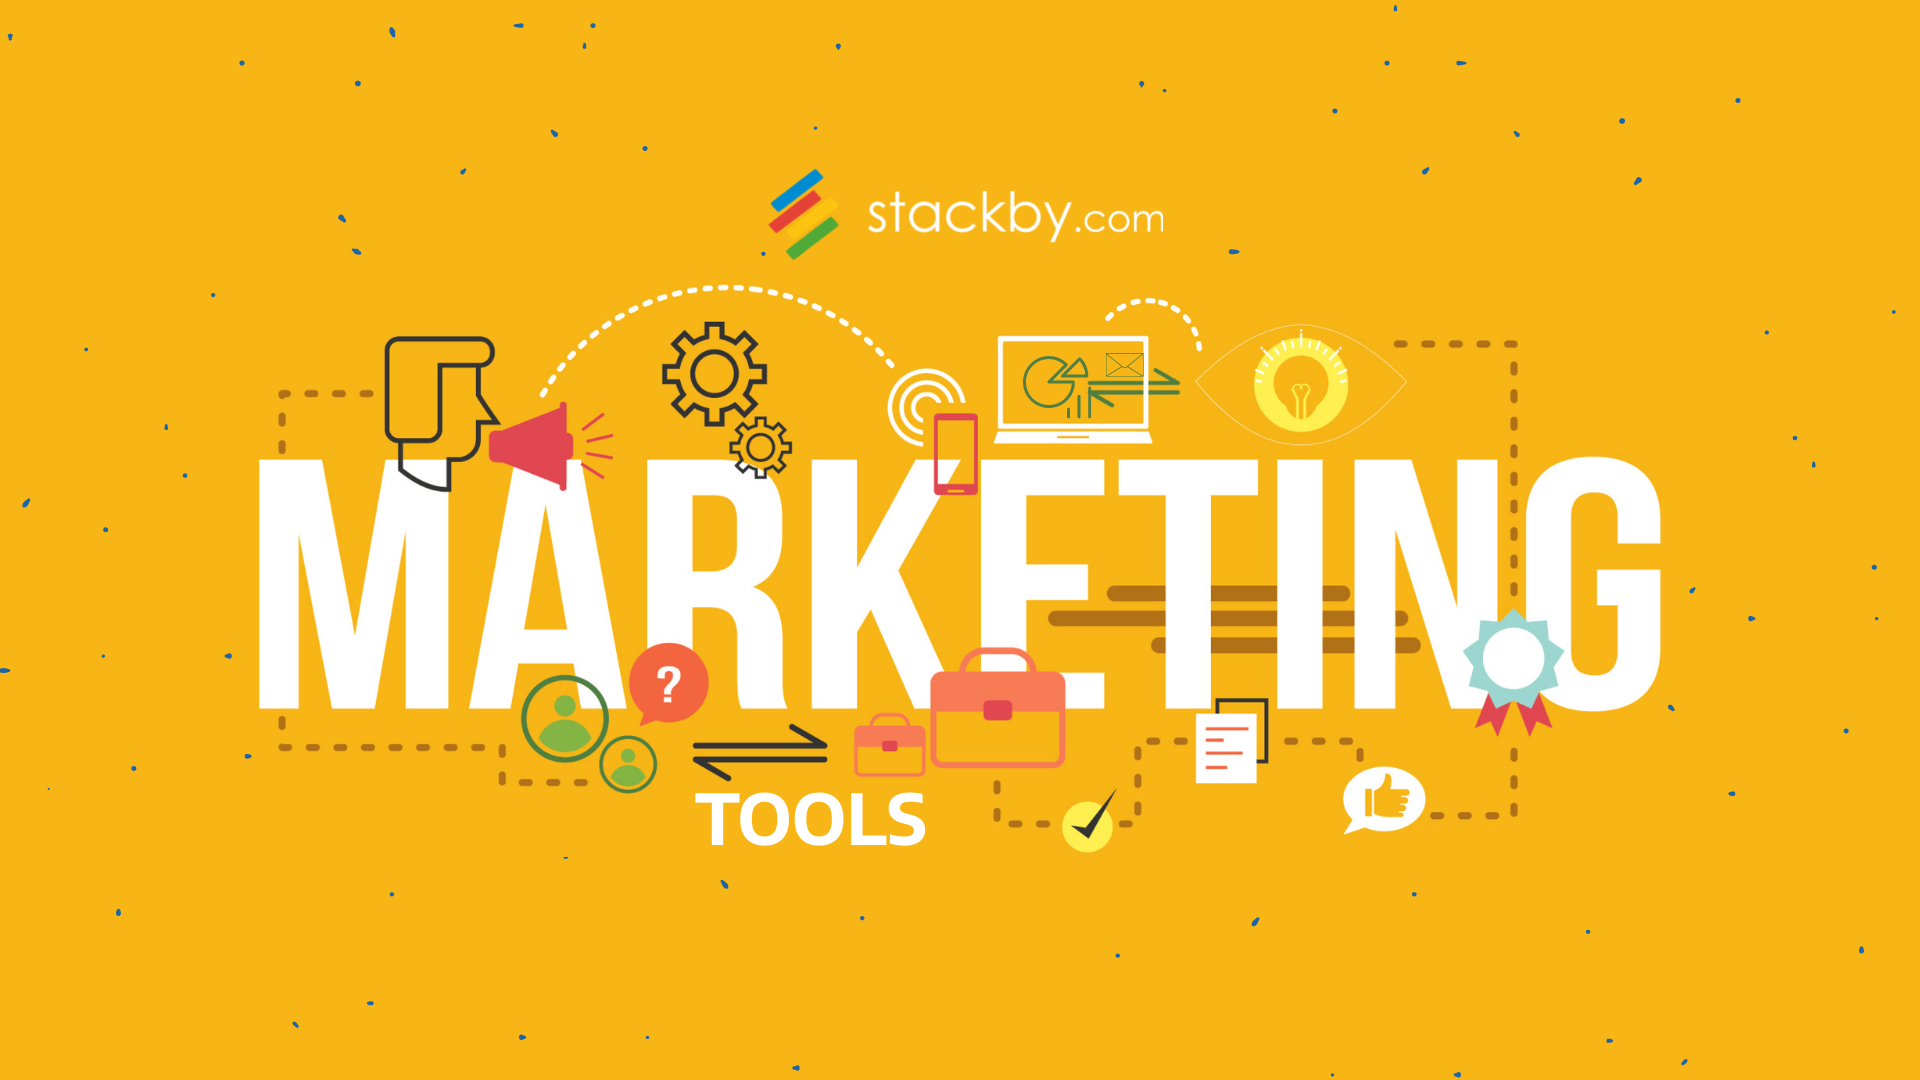 Top 18 marketing tools every small business should consider in 2023 & beyond